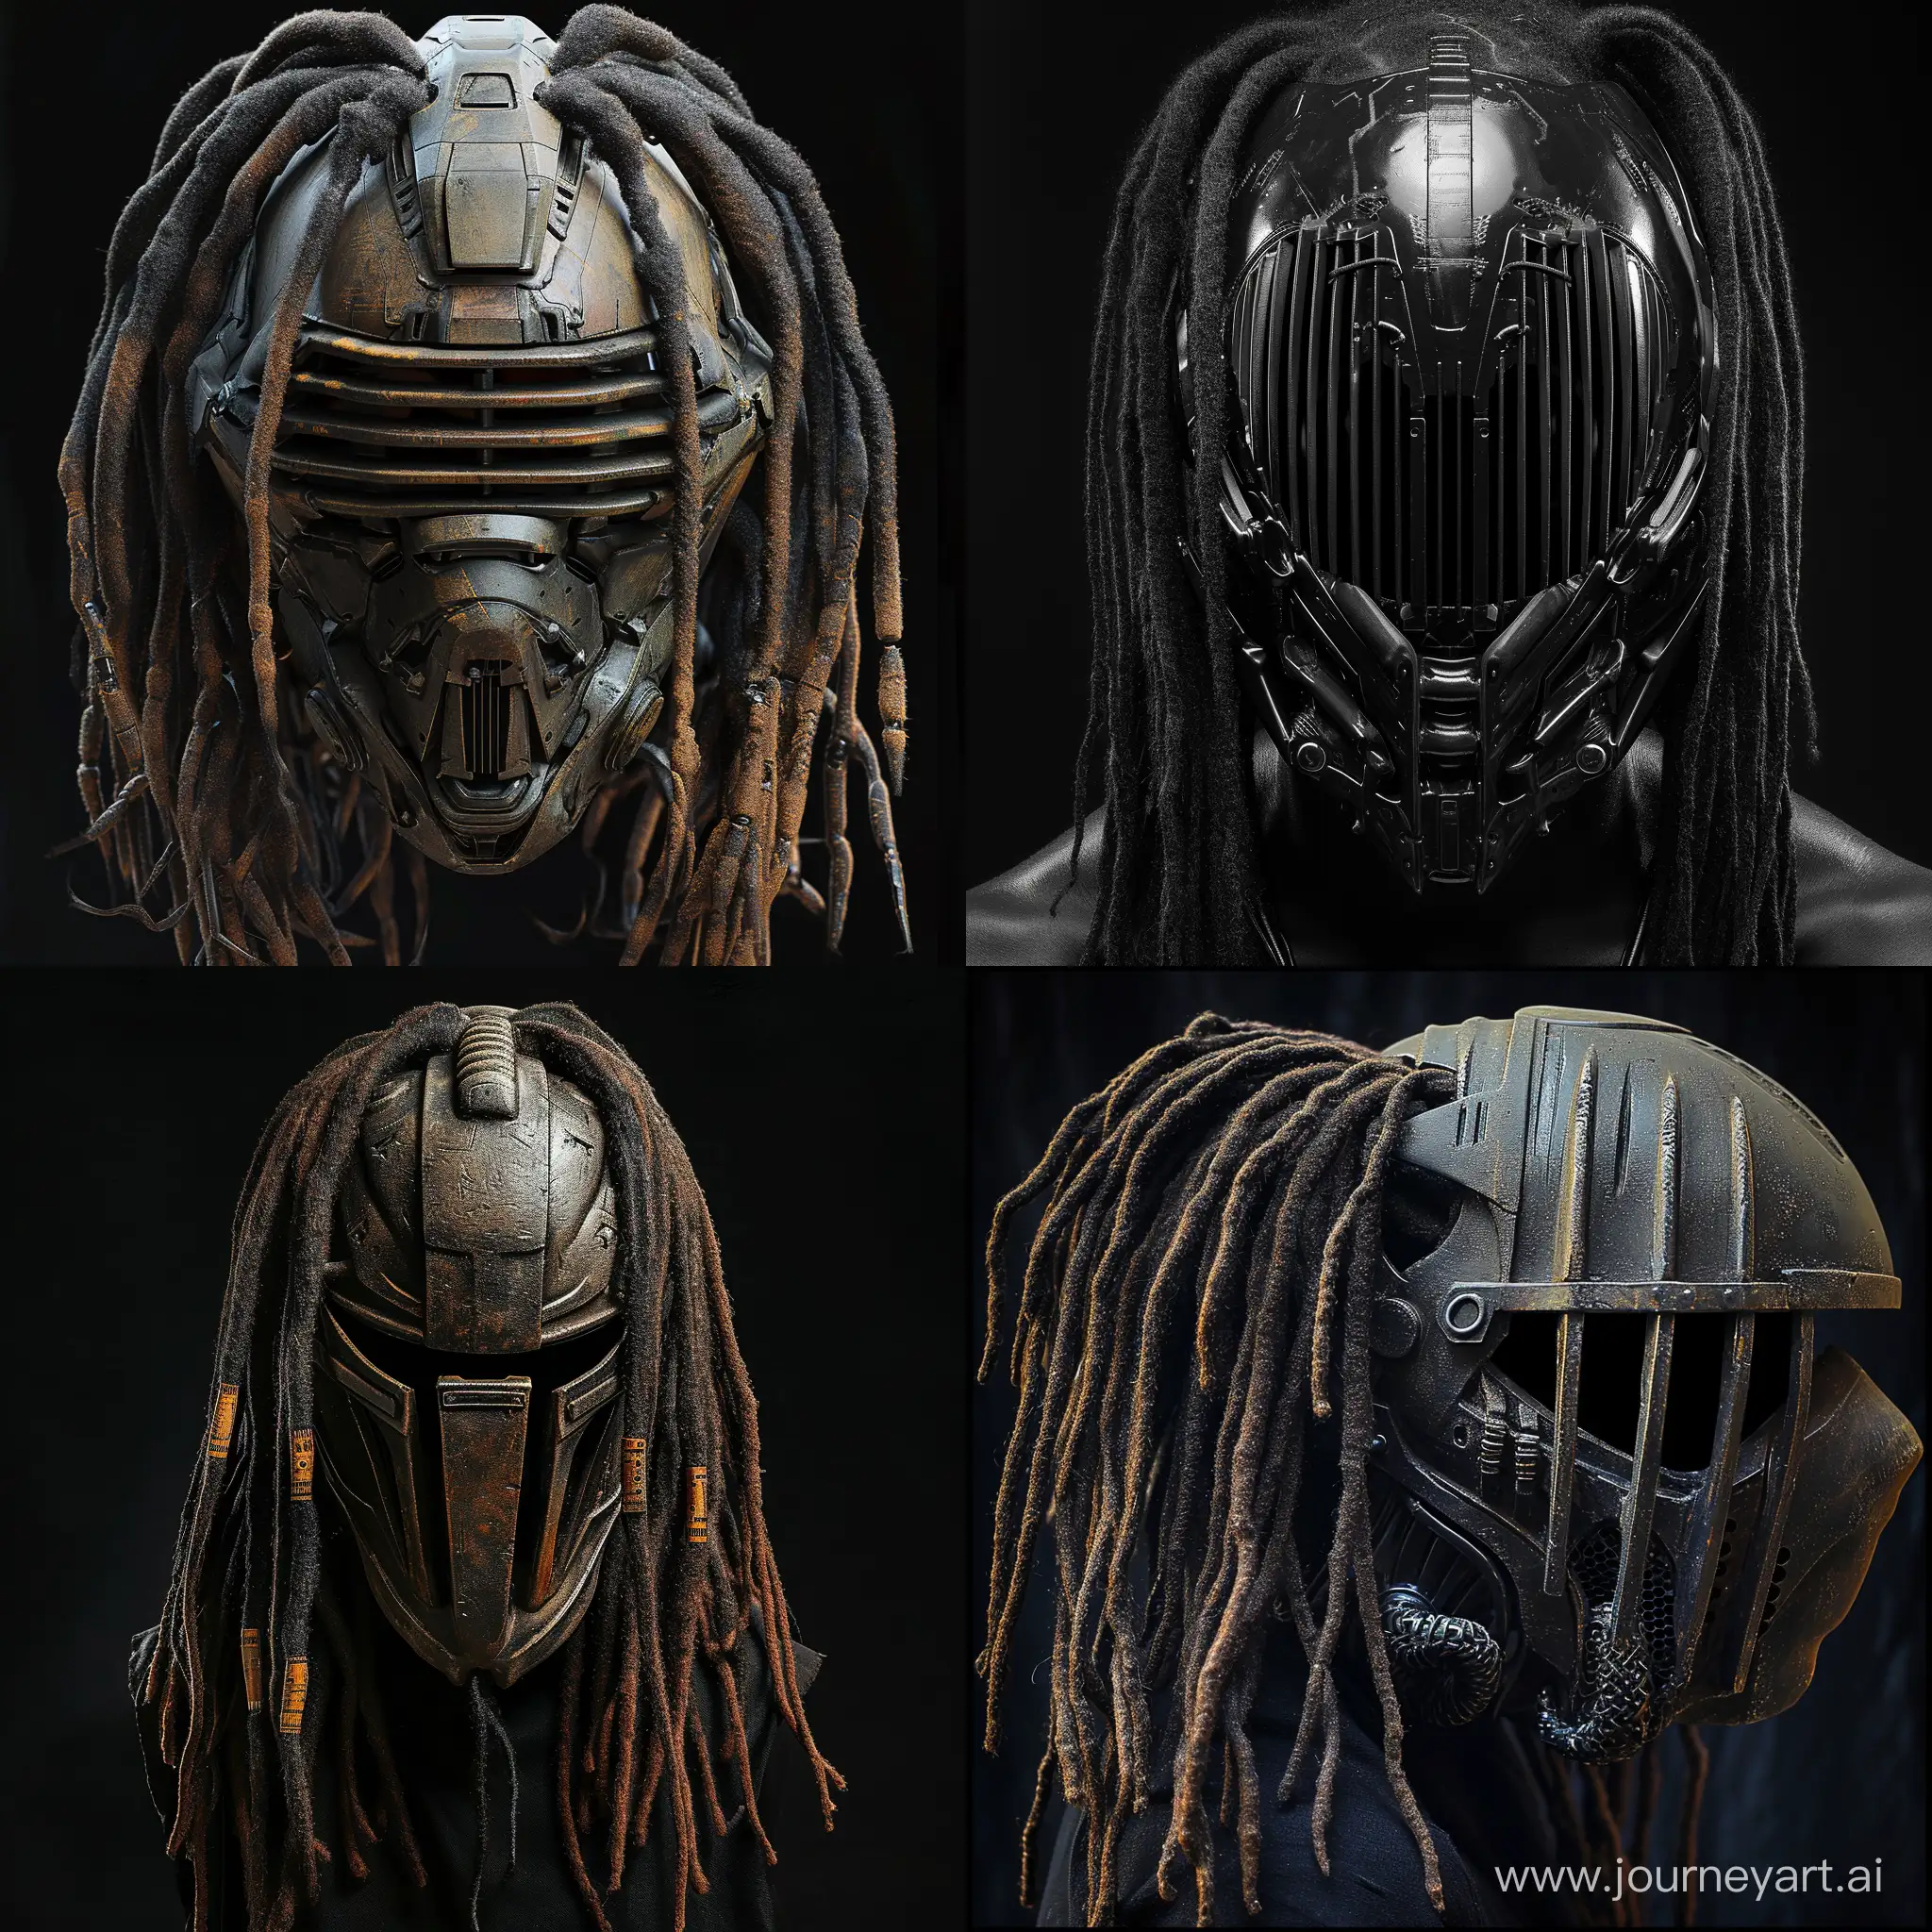 SciFi-Mask-with-Dreadlocked-Hair-and-Vertical-Grille-Eyes